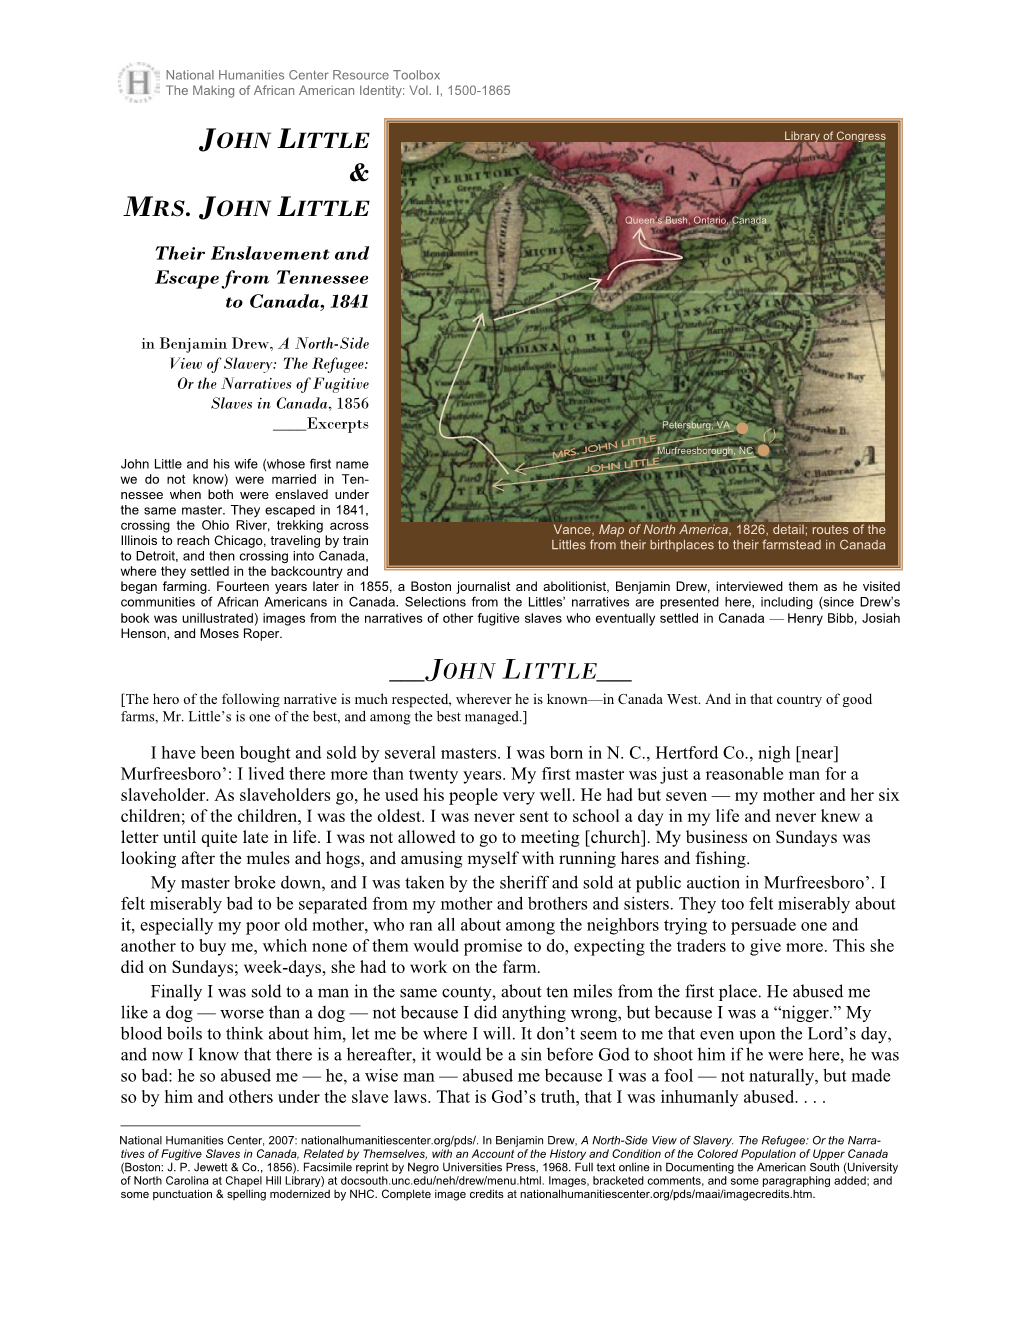 Enslavement and Escape of John Little and Mrs. John Little, from NC to Canada, 1841